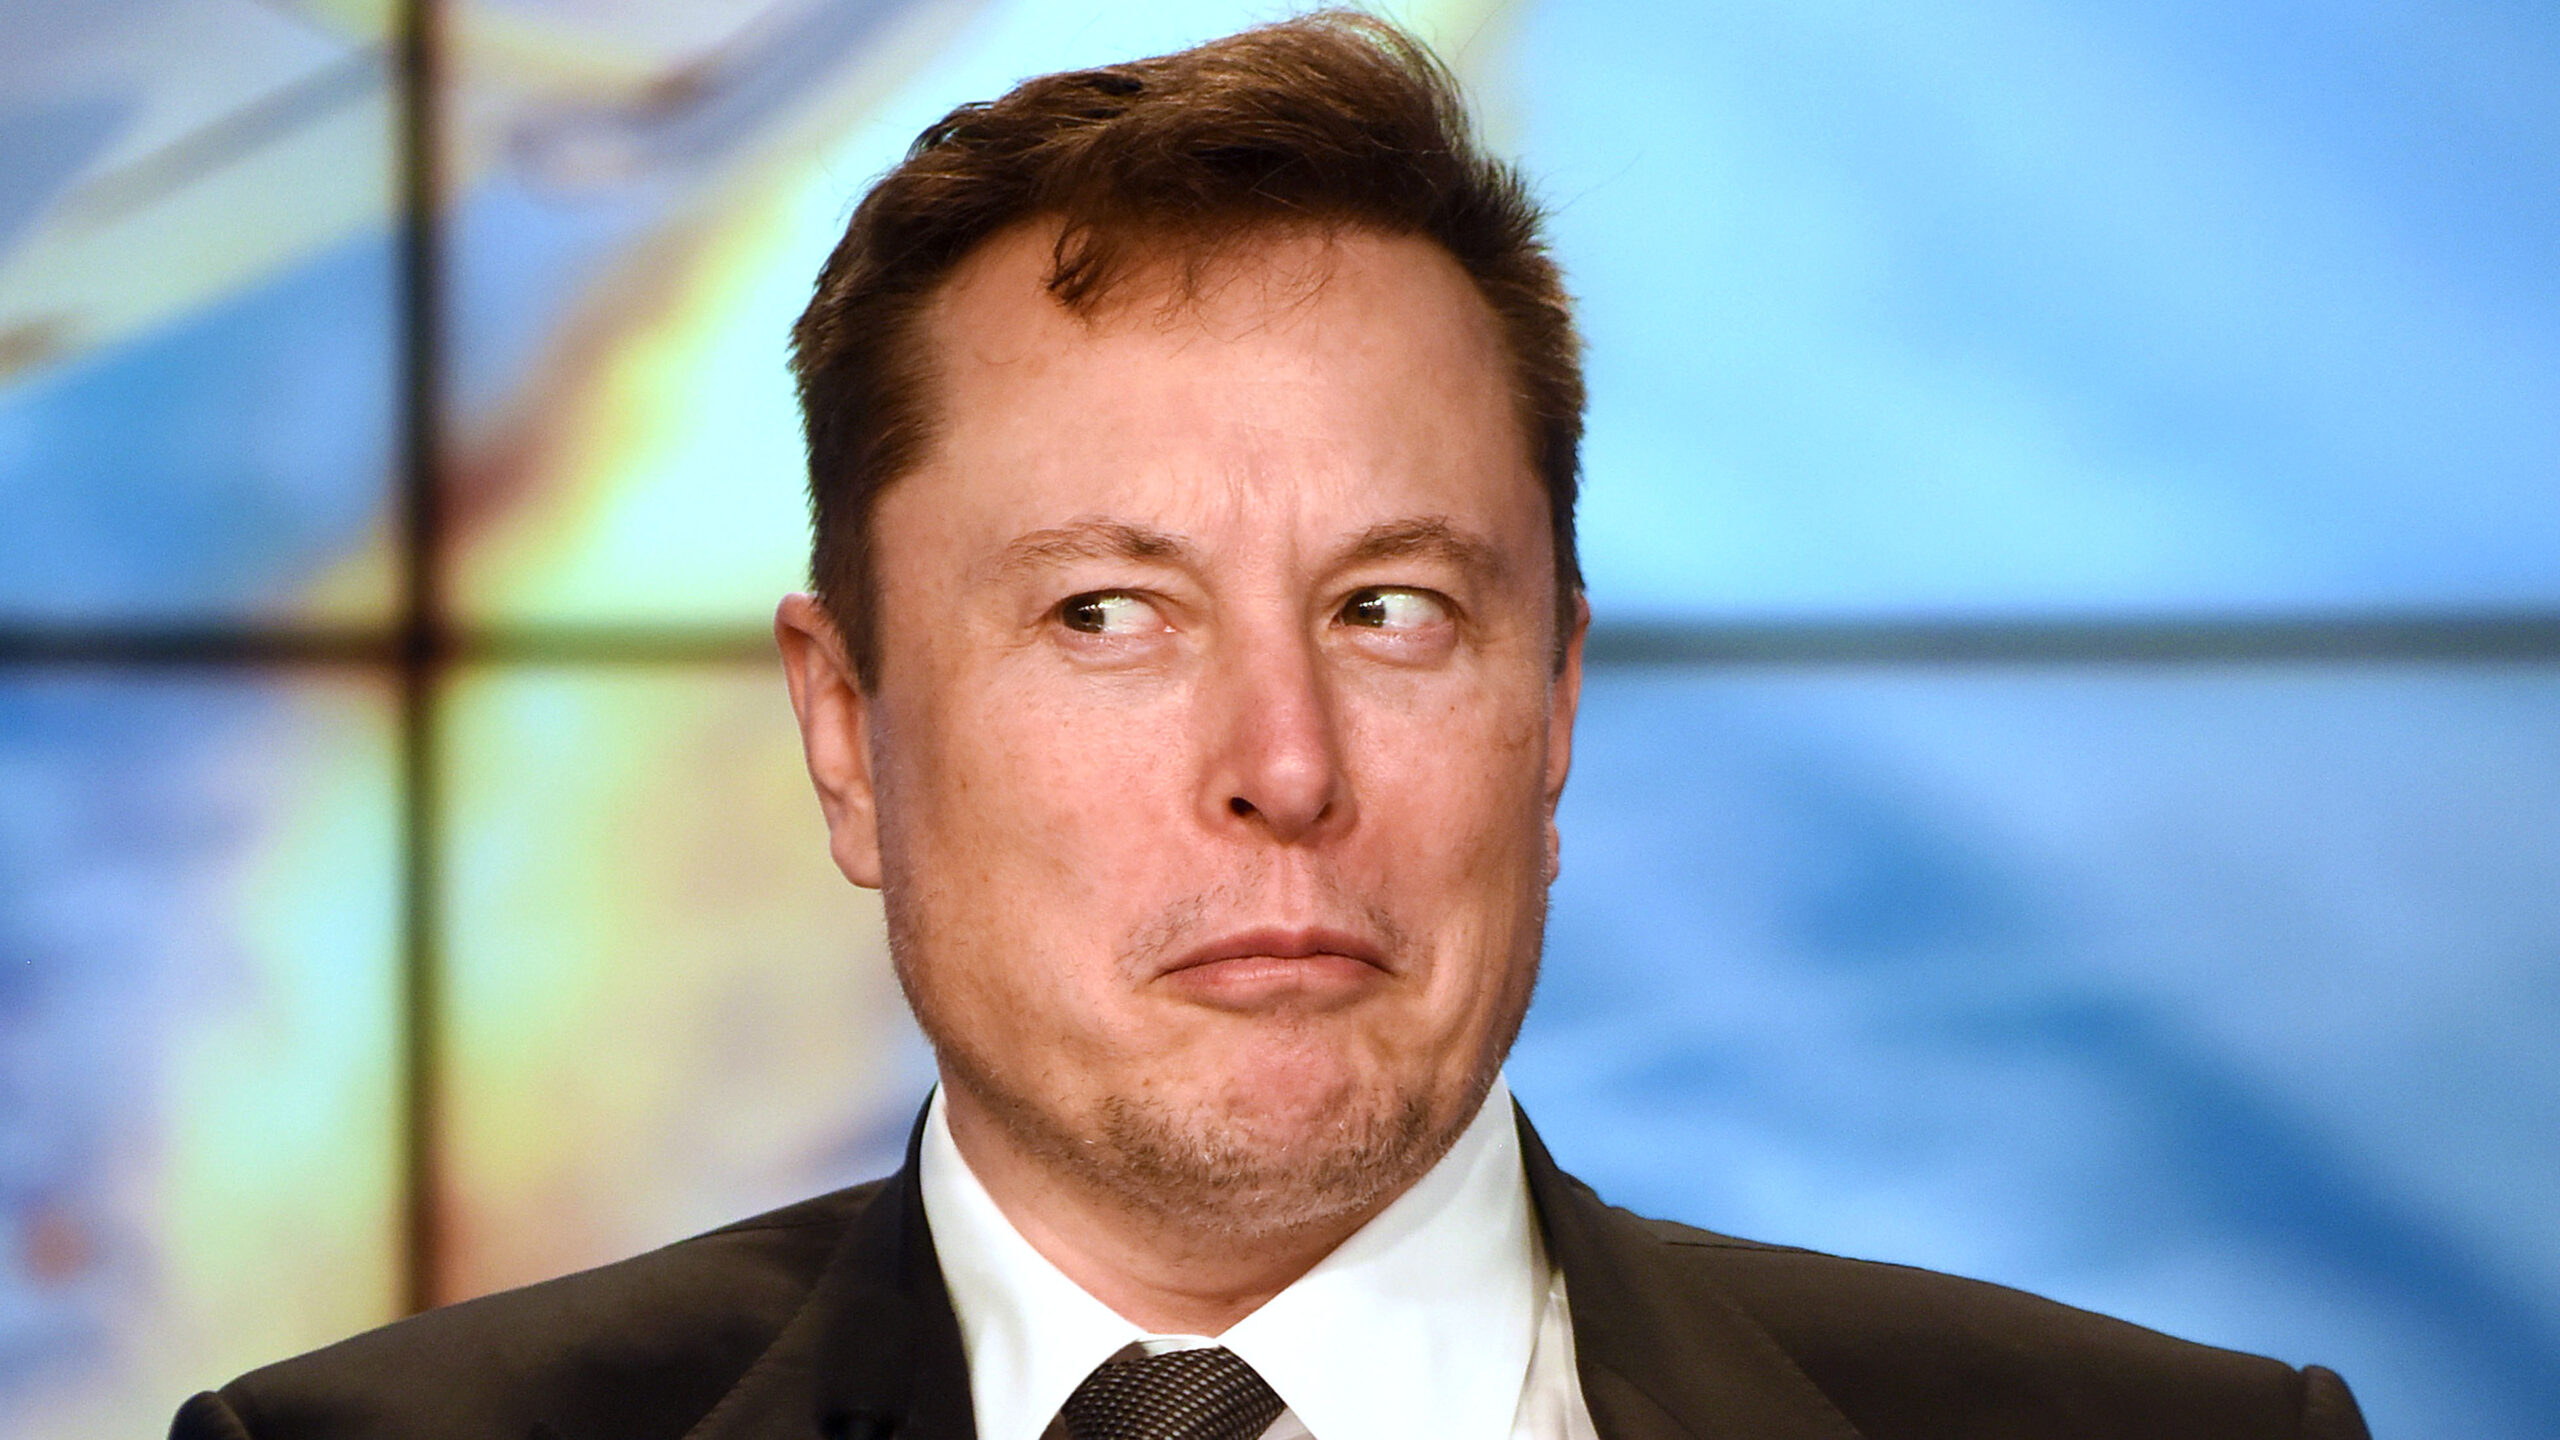 Elon Musk Generates Controversy Over What He Deems Good Twitter Policy While Discussing Censorship